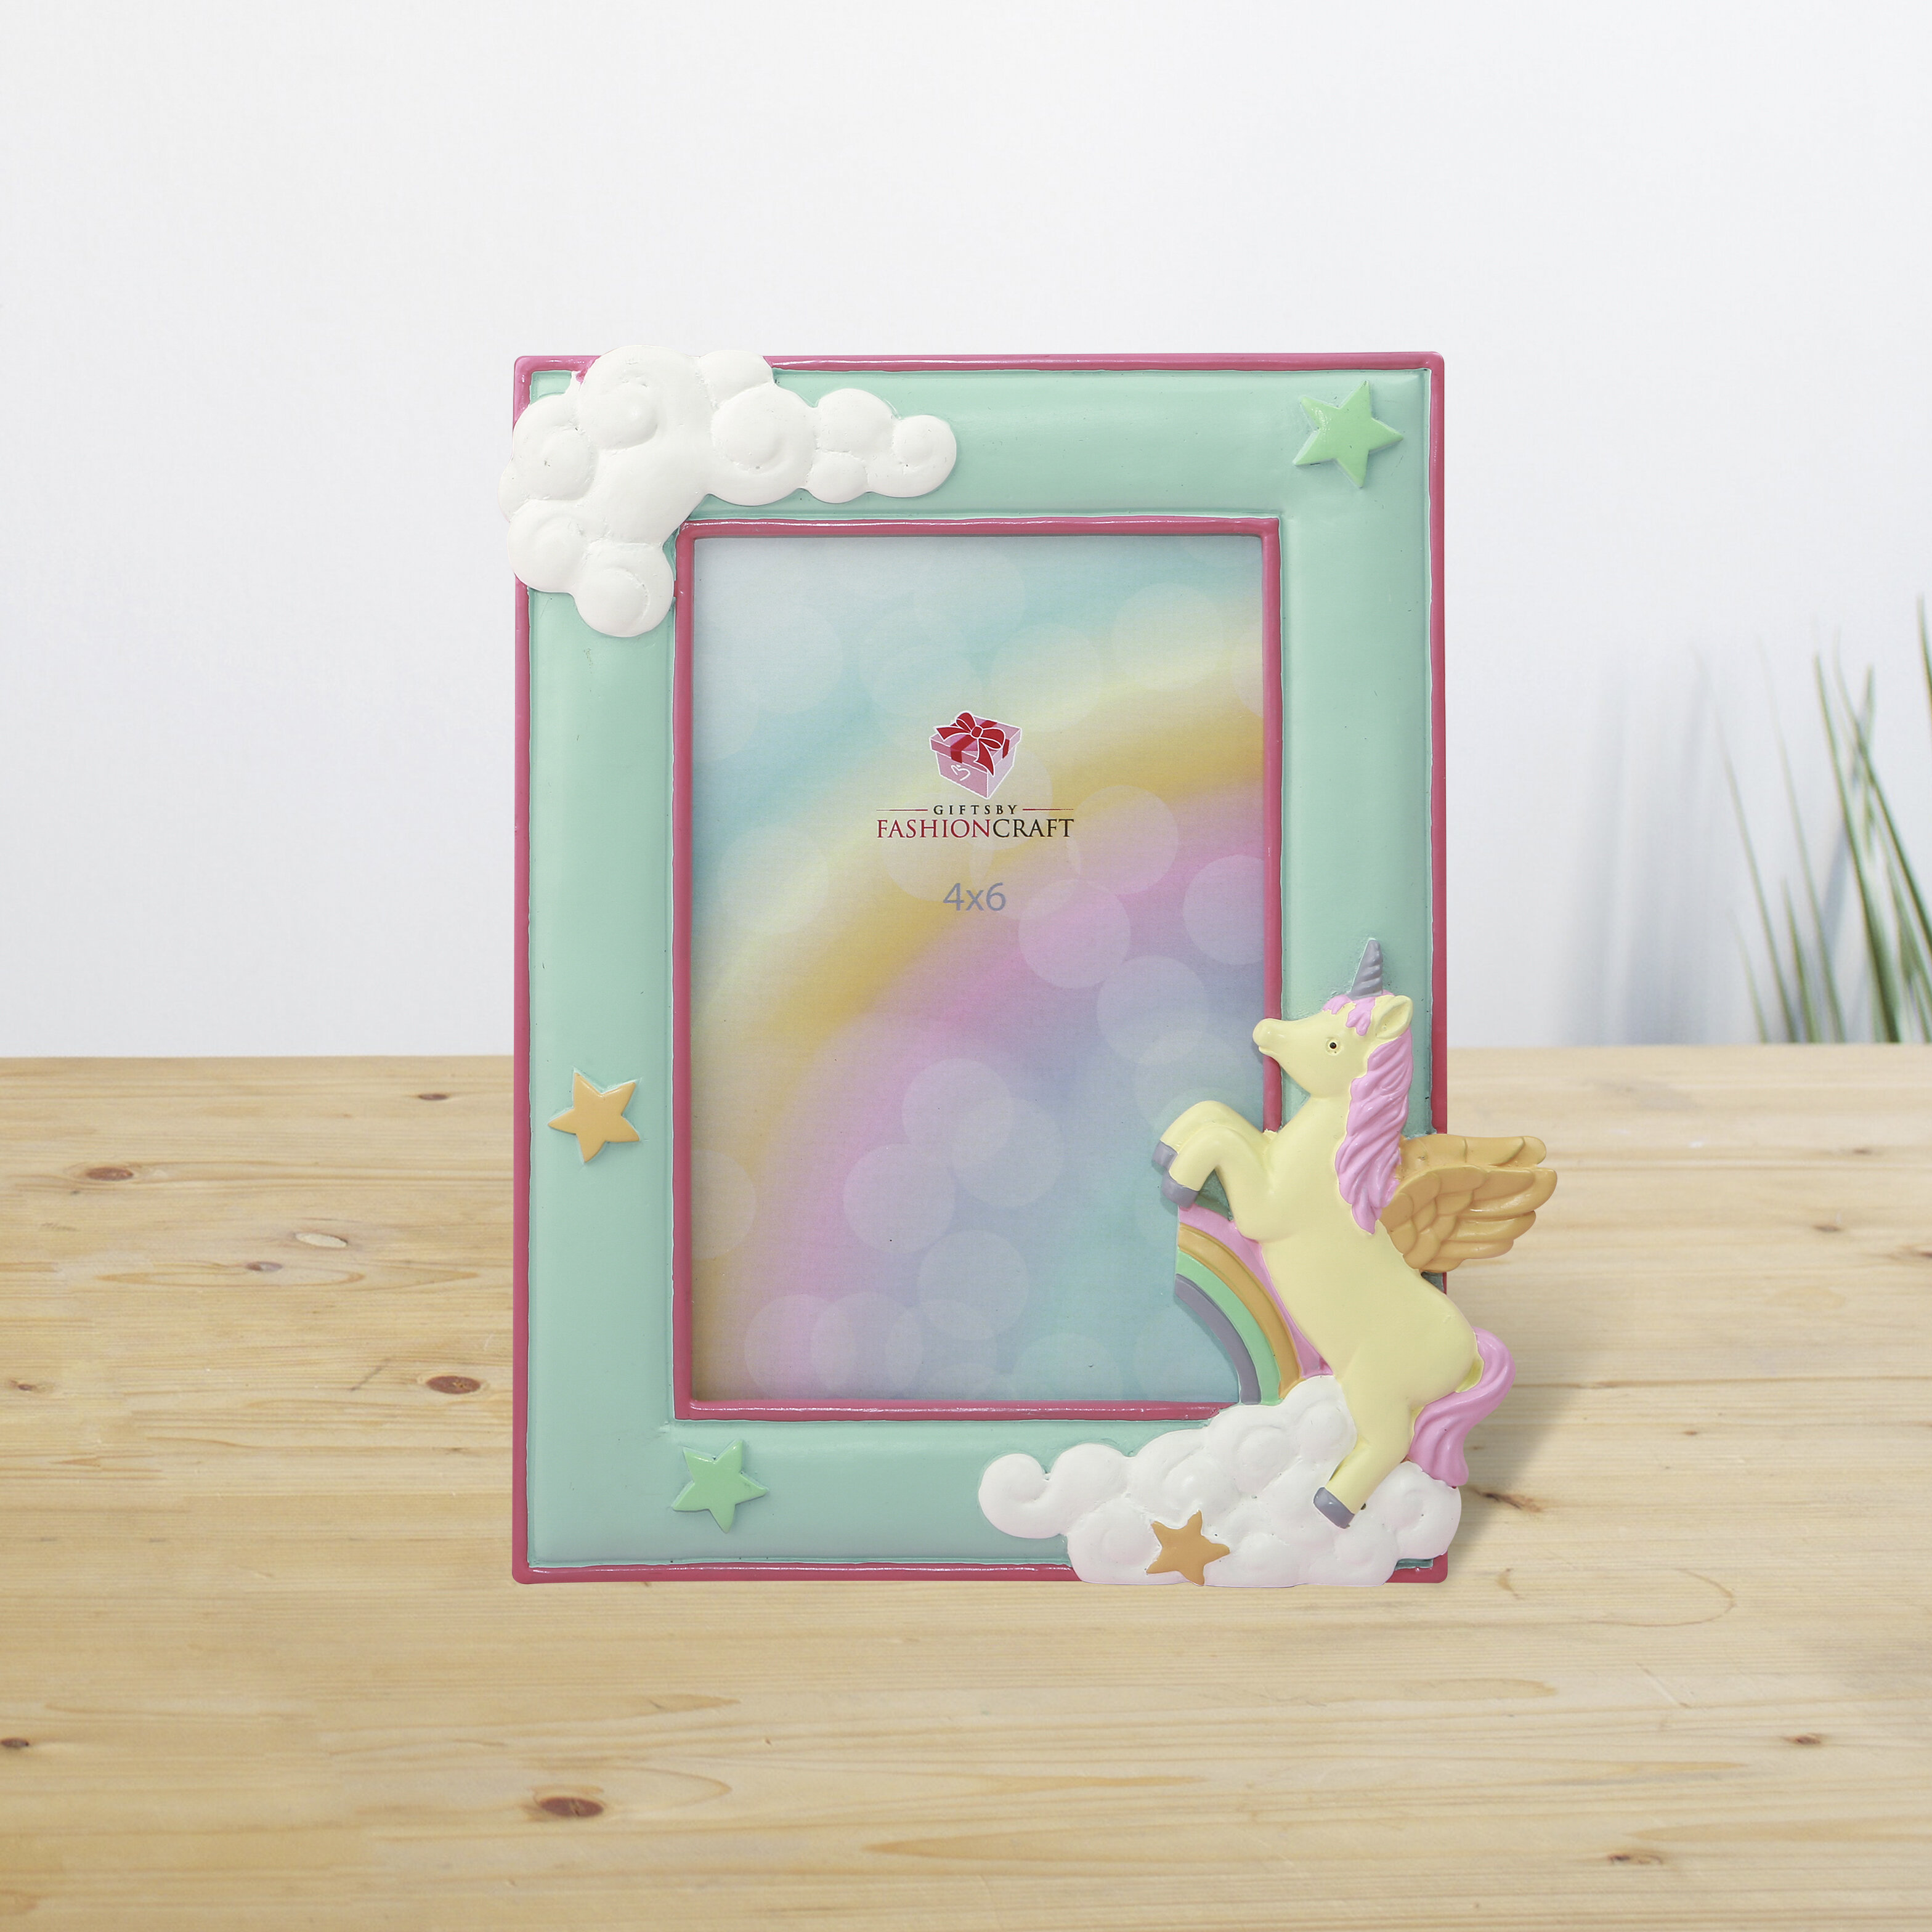 Mozlly Mint Green Unicorn Baby First Year Collage Photo Frame Standard 4 X 6 Inch Photo at The Center Nursery Room Decor Mythical Fantasy Creature Picture Frame for Baby Girls from Birth to 1 Year 